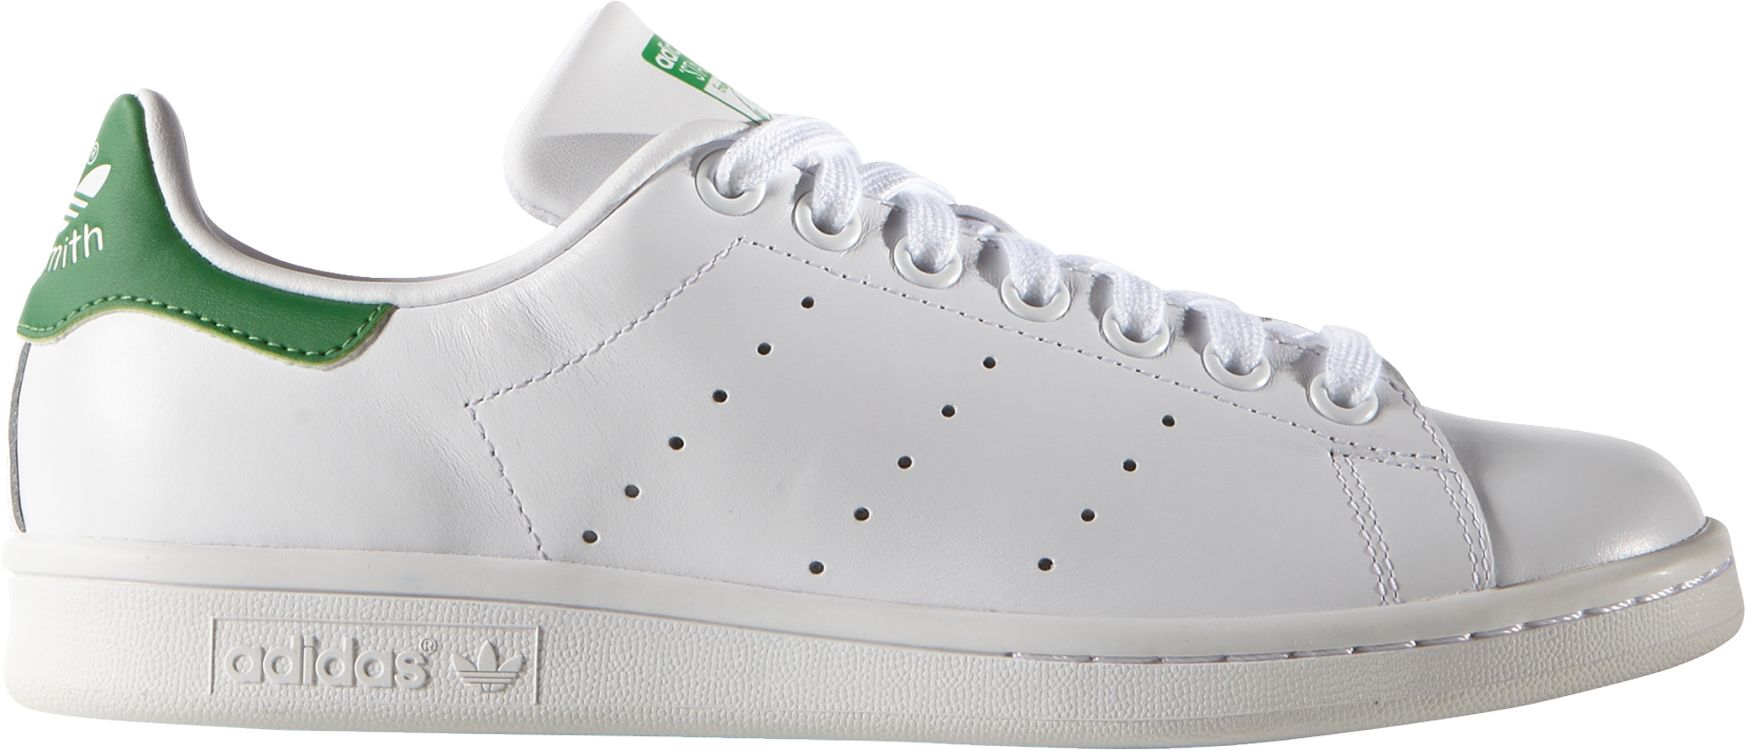 adidas sneakers stan smith womens